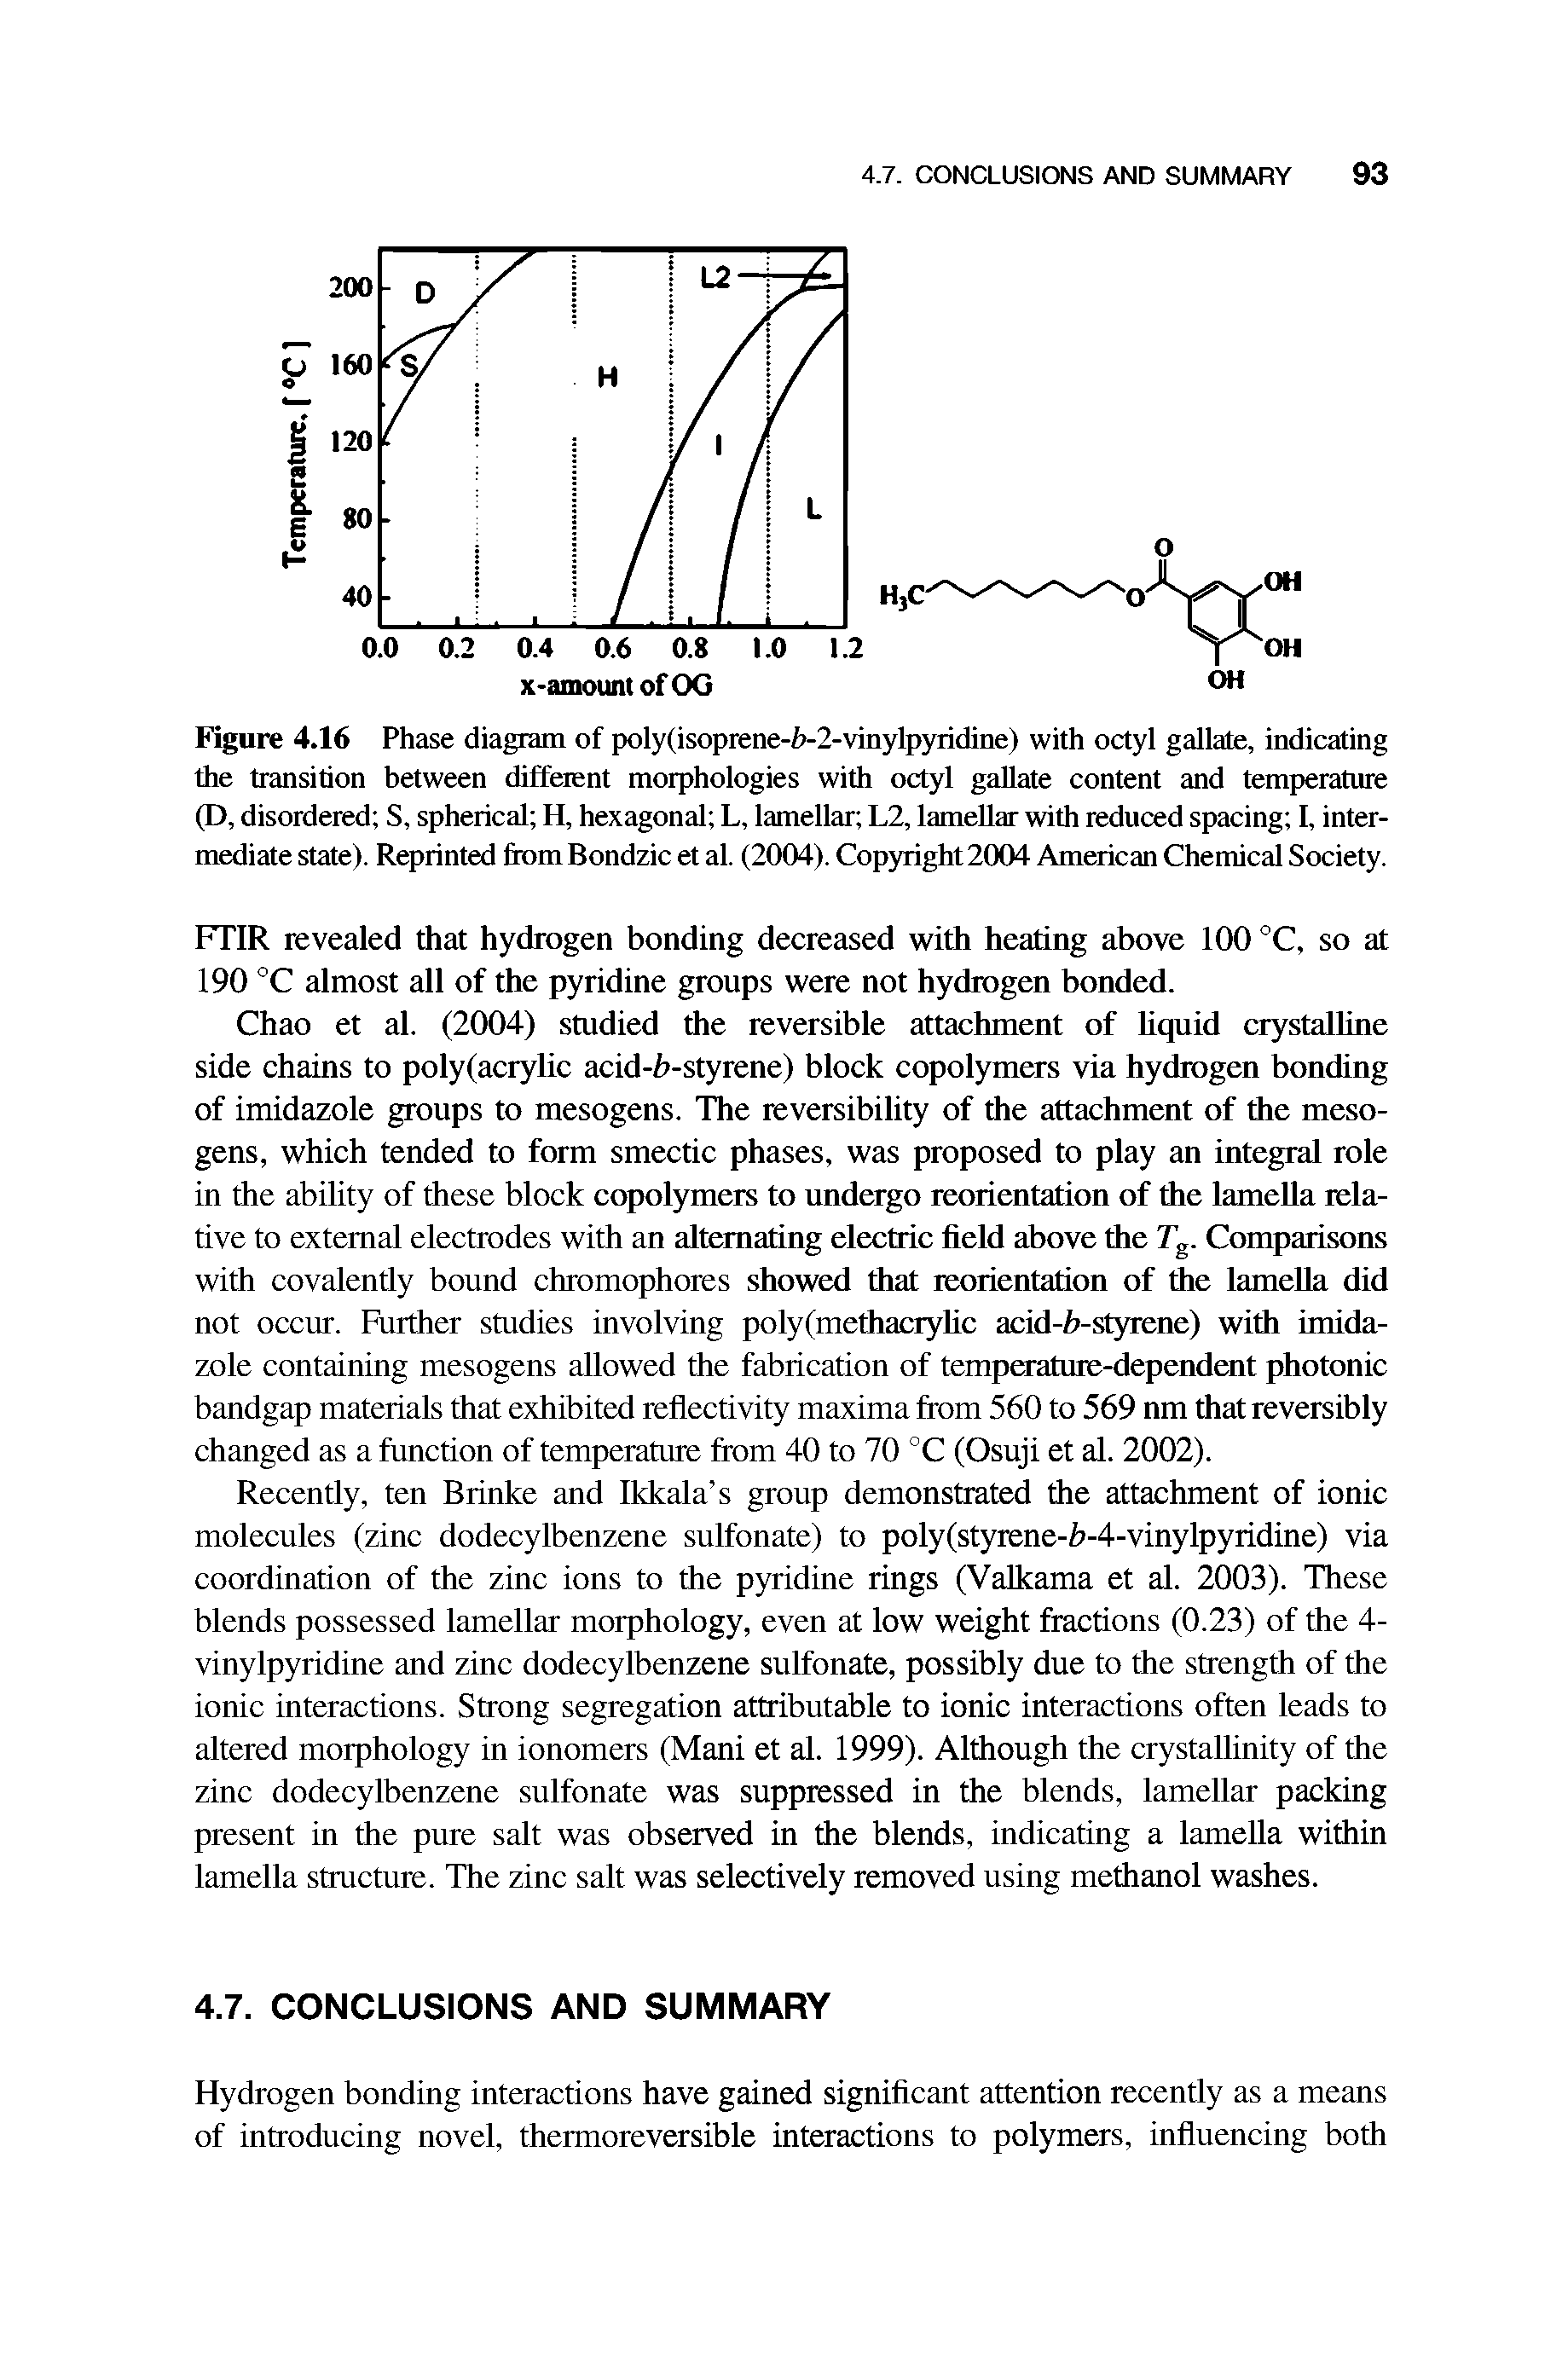 Figure 4.16 Phase diagram of poly(isoprene-Z>-2-vinylpyridine) with octyl gallate, indicating the transition between different morphologies with octyl gallate content and temperature (D, disordered S, spherical H, hexagonal L, lamellar L2, lamellar with reduced spacing I, intermediate state). Reprinted ftomBondzic et al. (2004). Copyright2004 American Chemical Society.